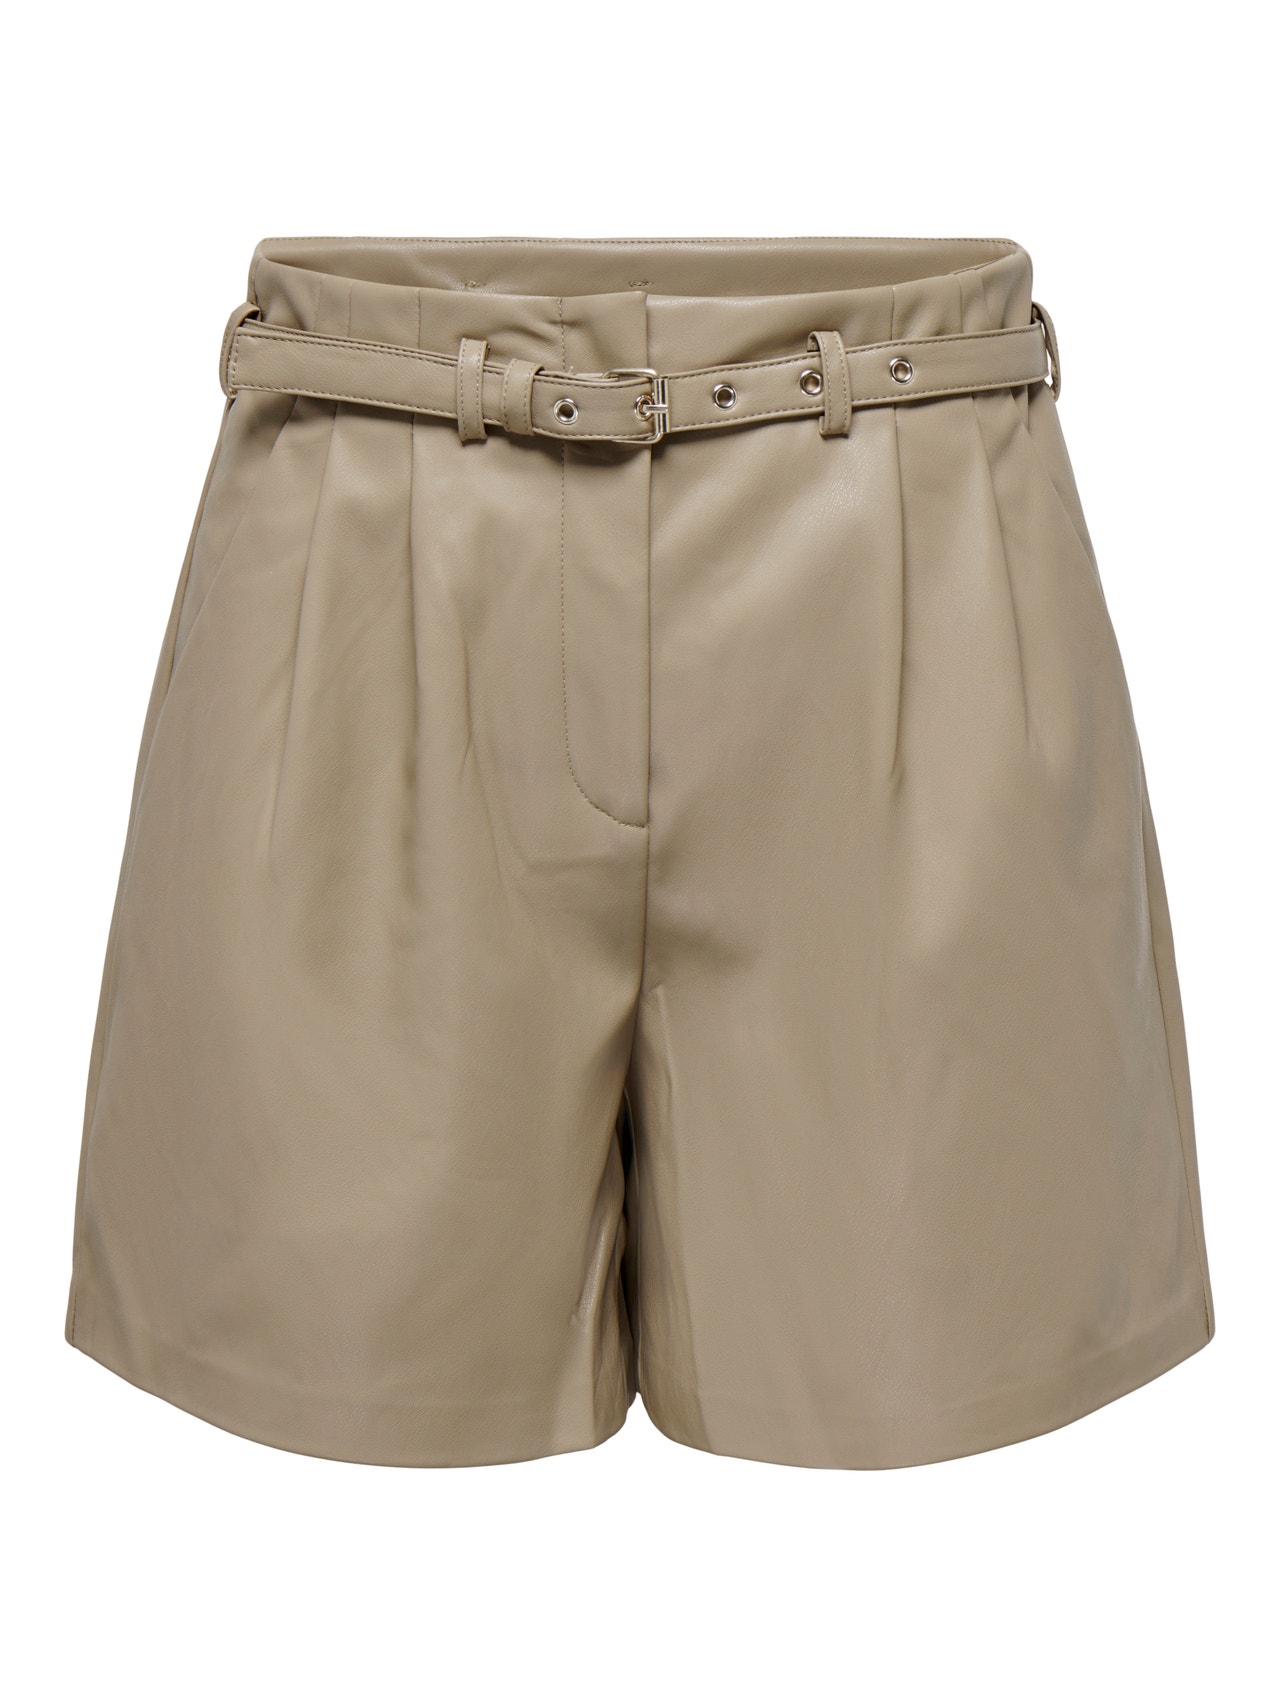 ONLY Faux leather shorts -Weathered Teak - 15275421